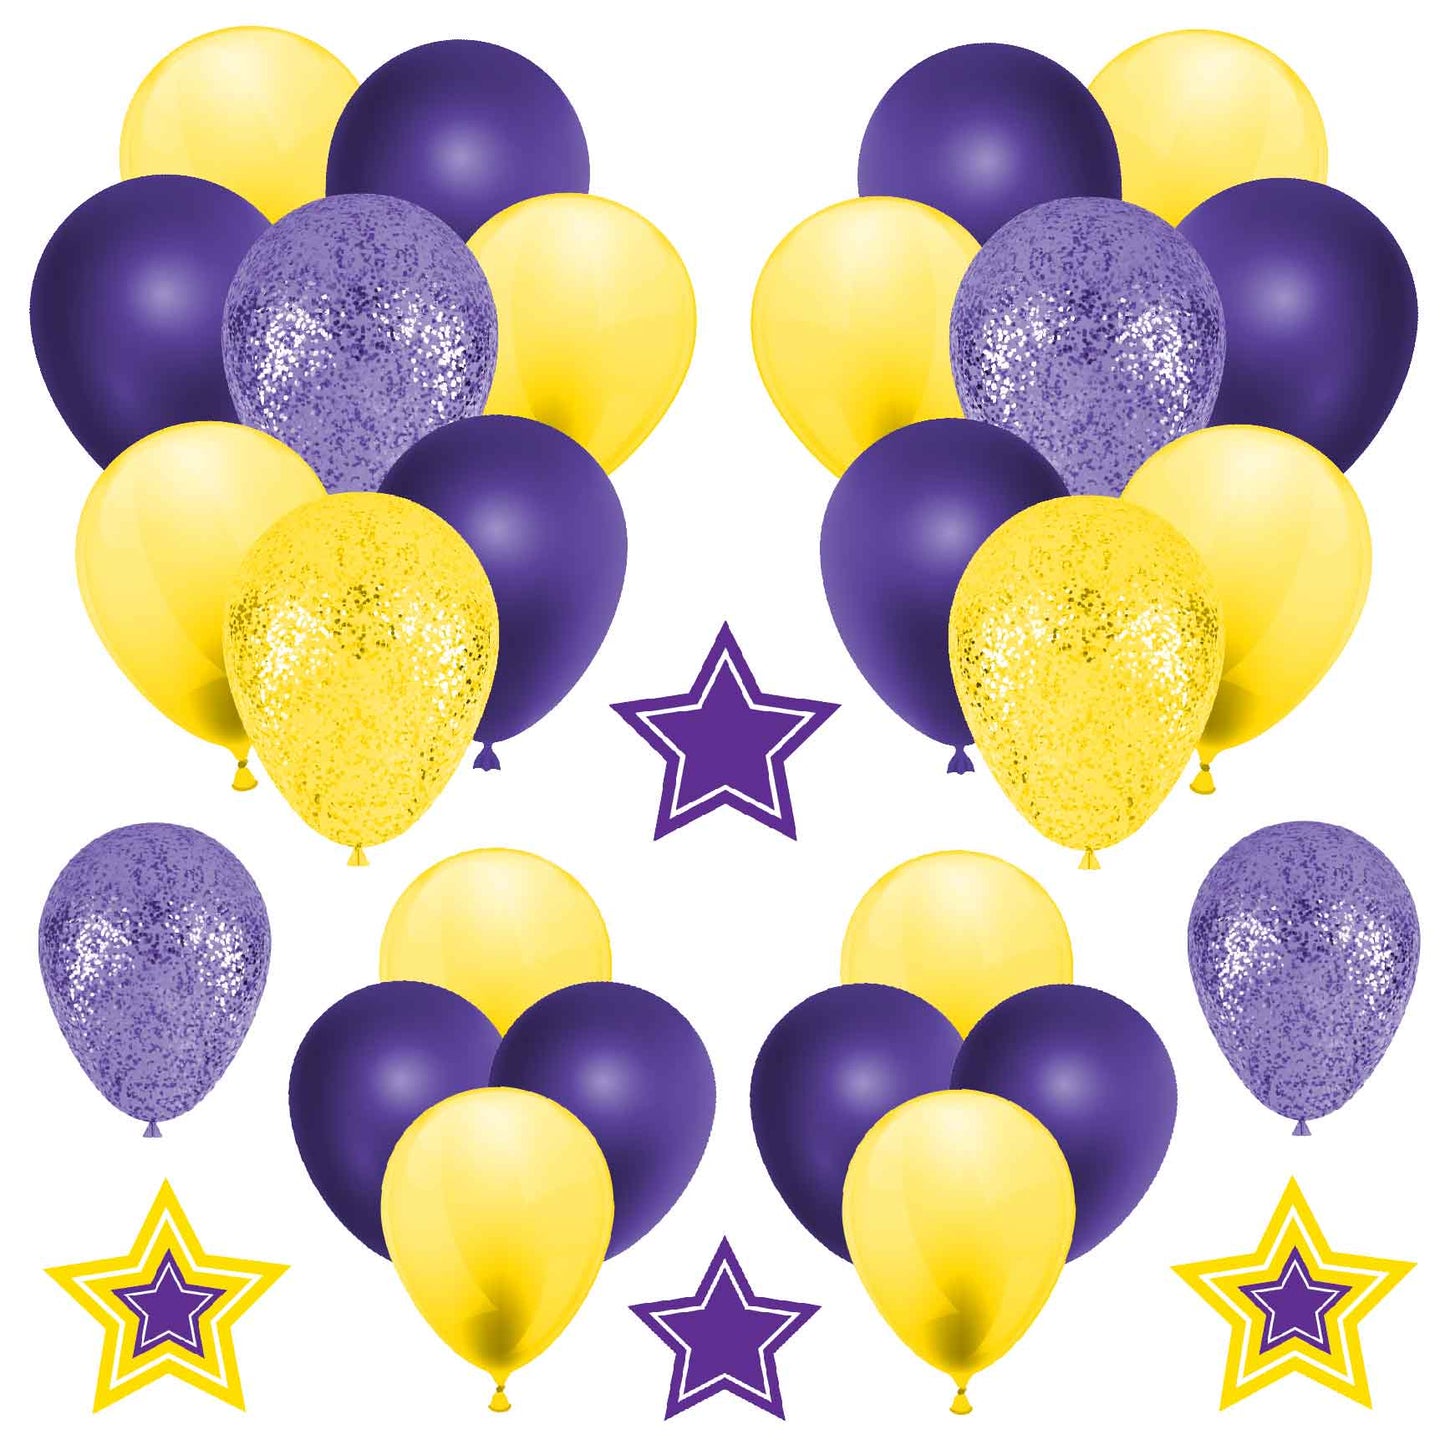 Yellow and Purple Balloons Half Sheet Misc. (Must Purchase 2 Half sheets - You Can Mix & Match)